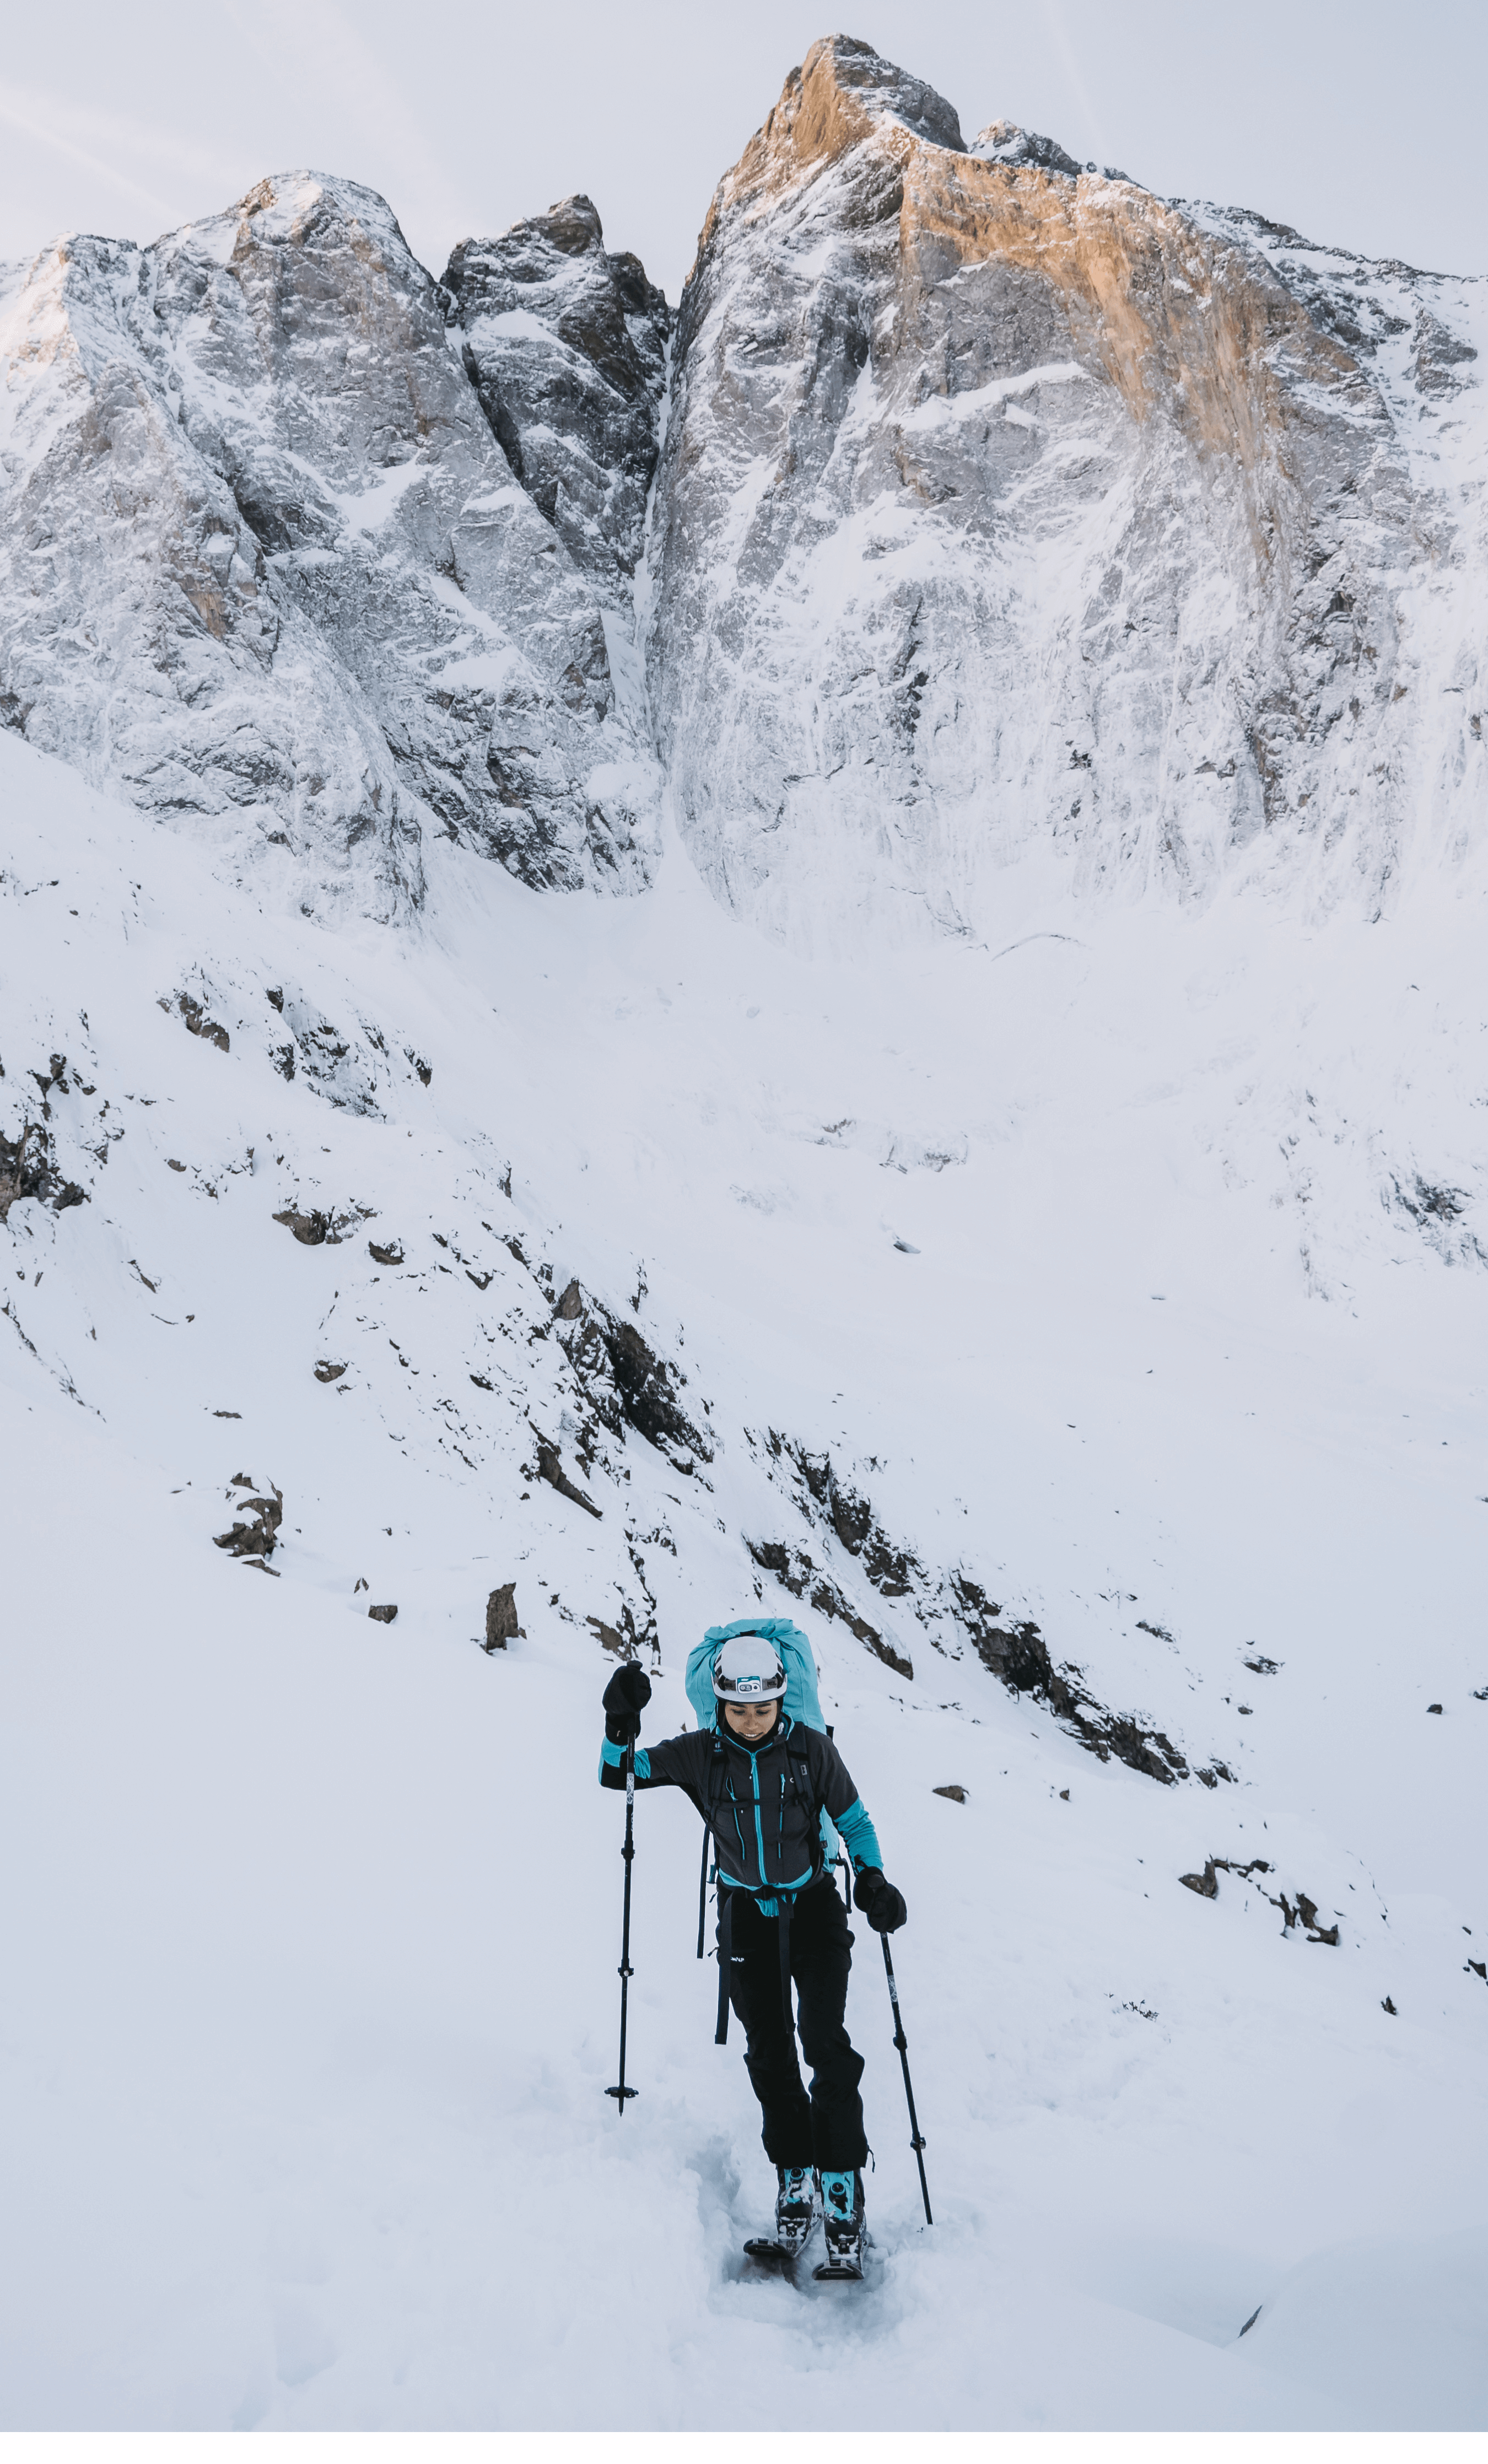 A woman skiing uphill, surrounded by beautiful scenery